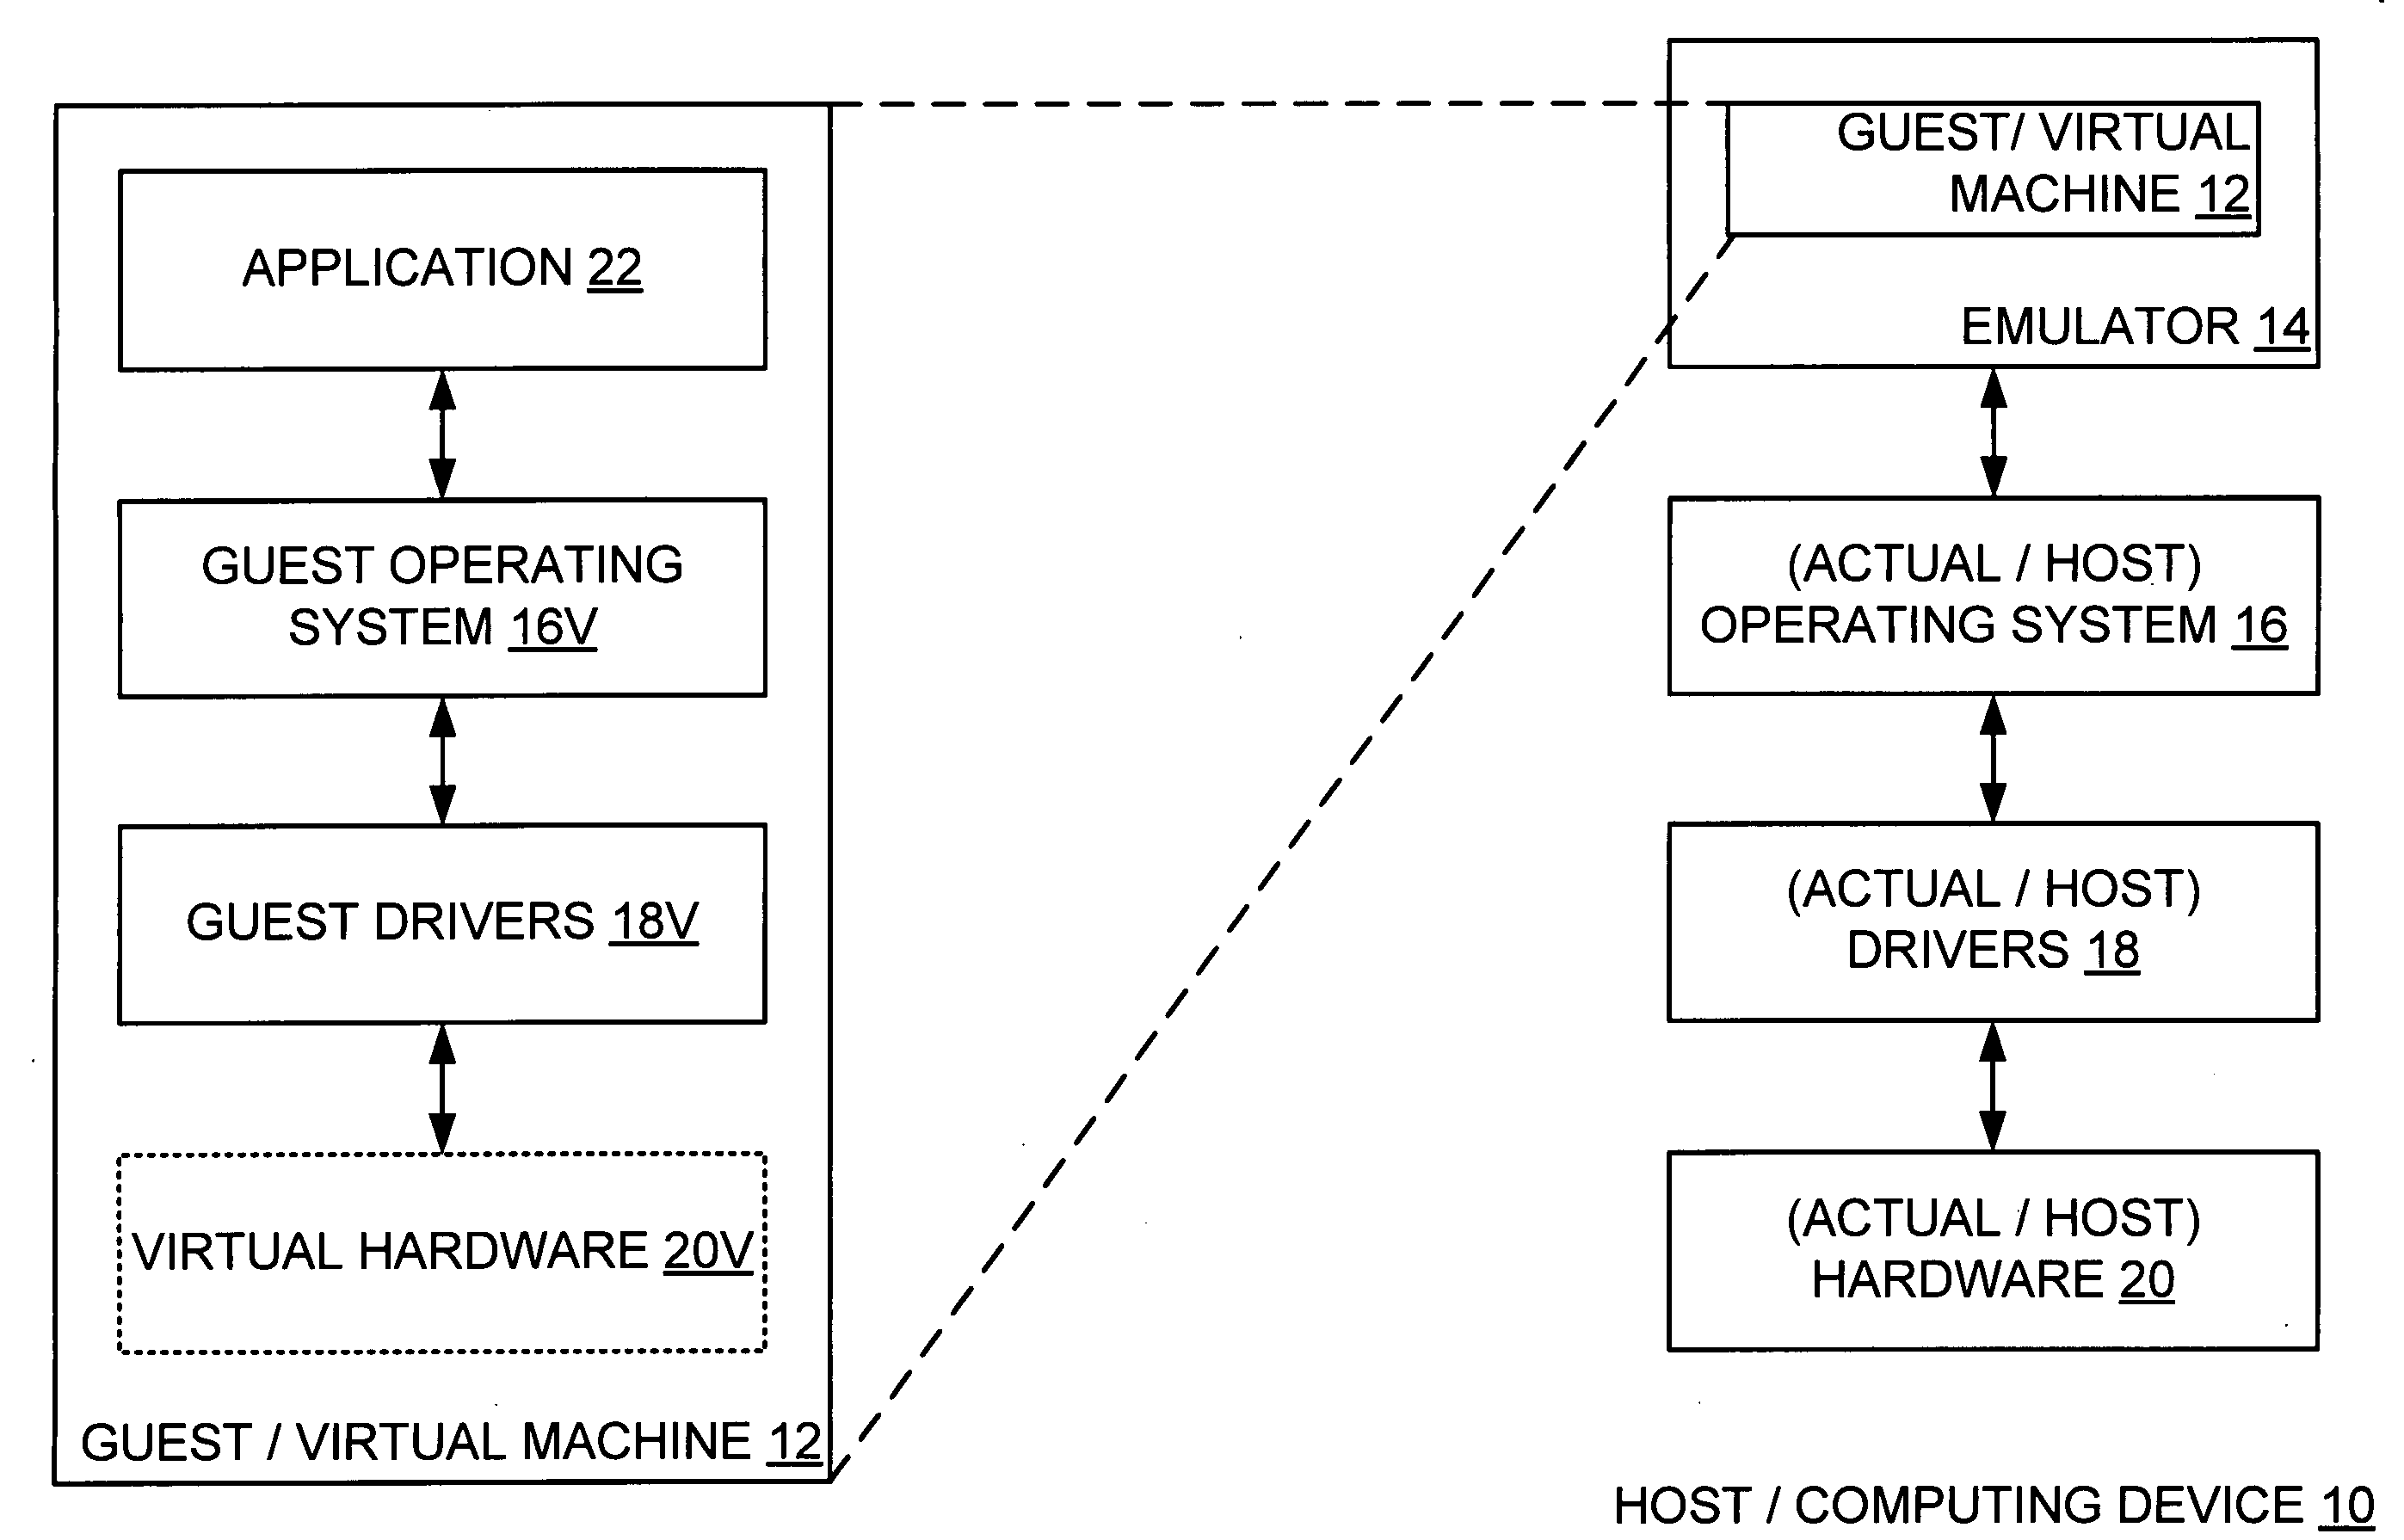 Partial virtualization on computing device